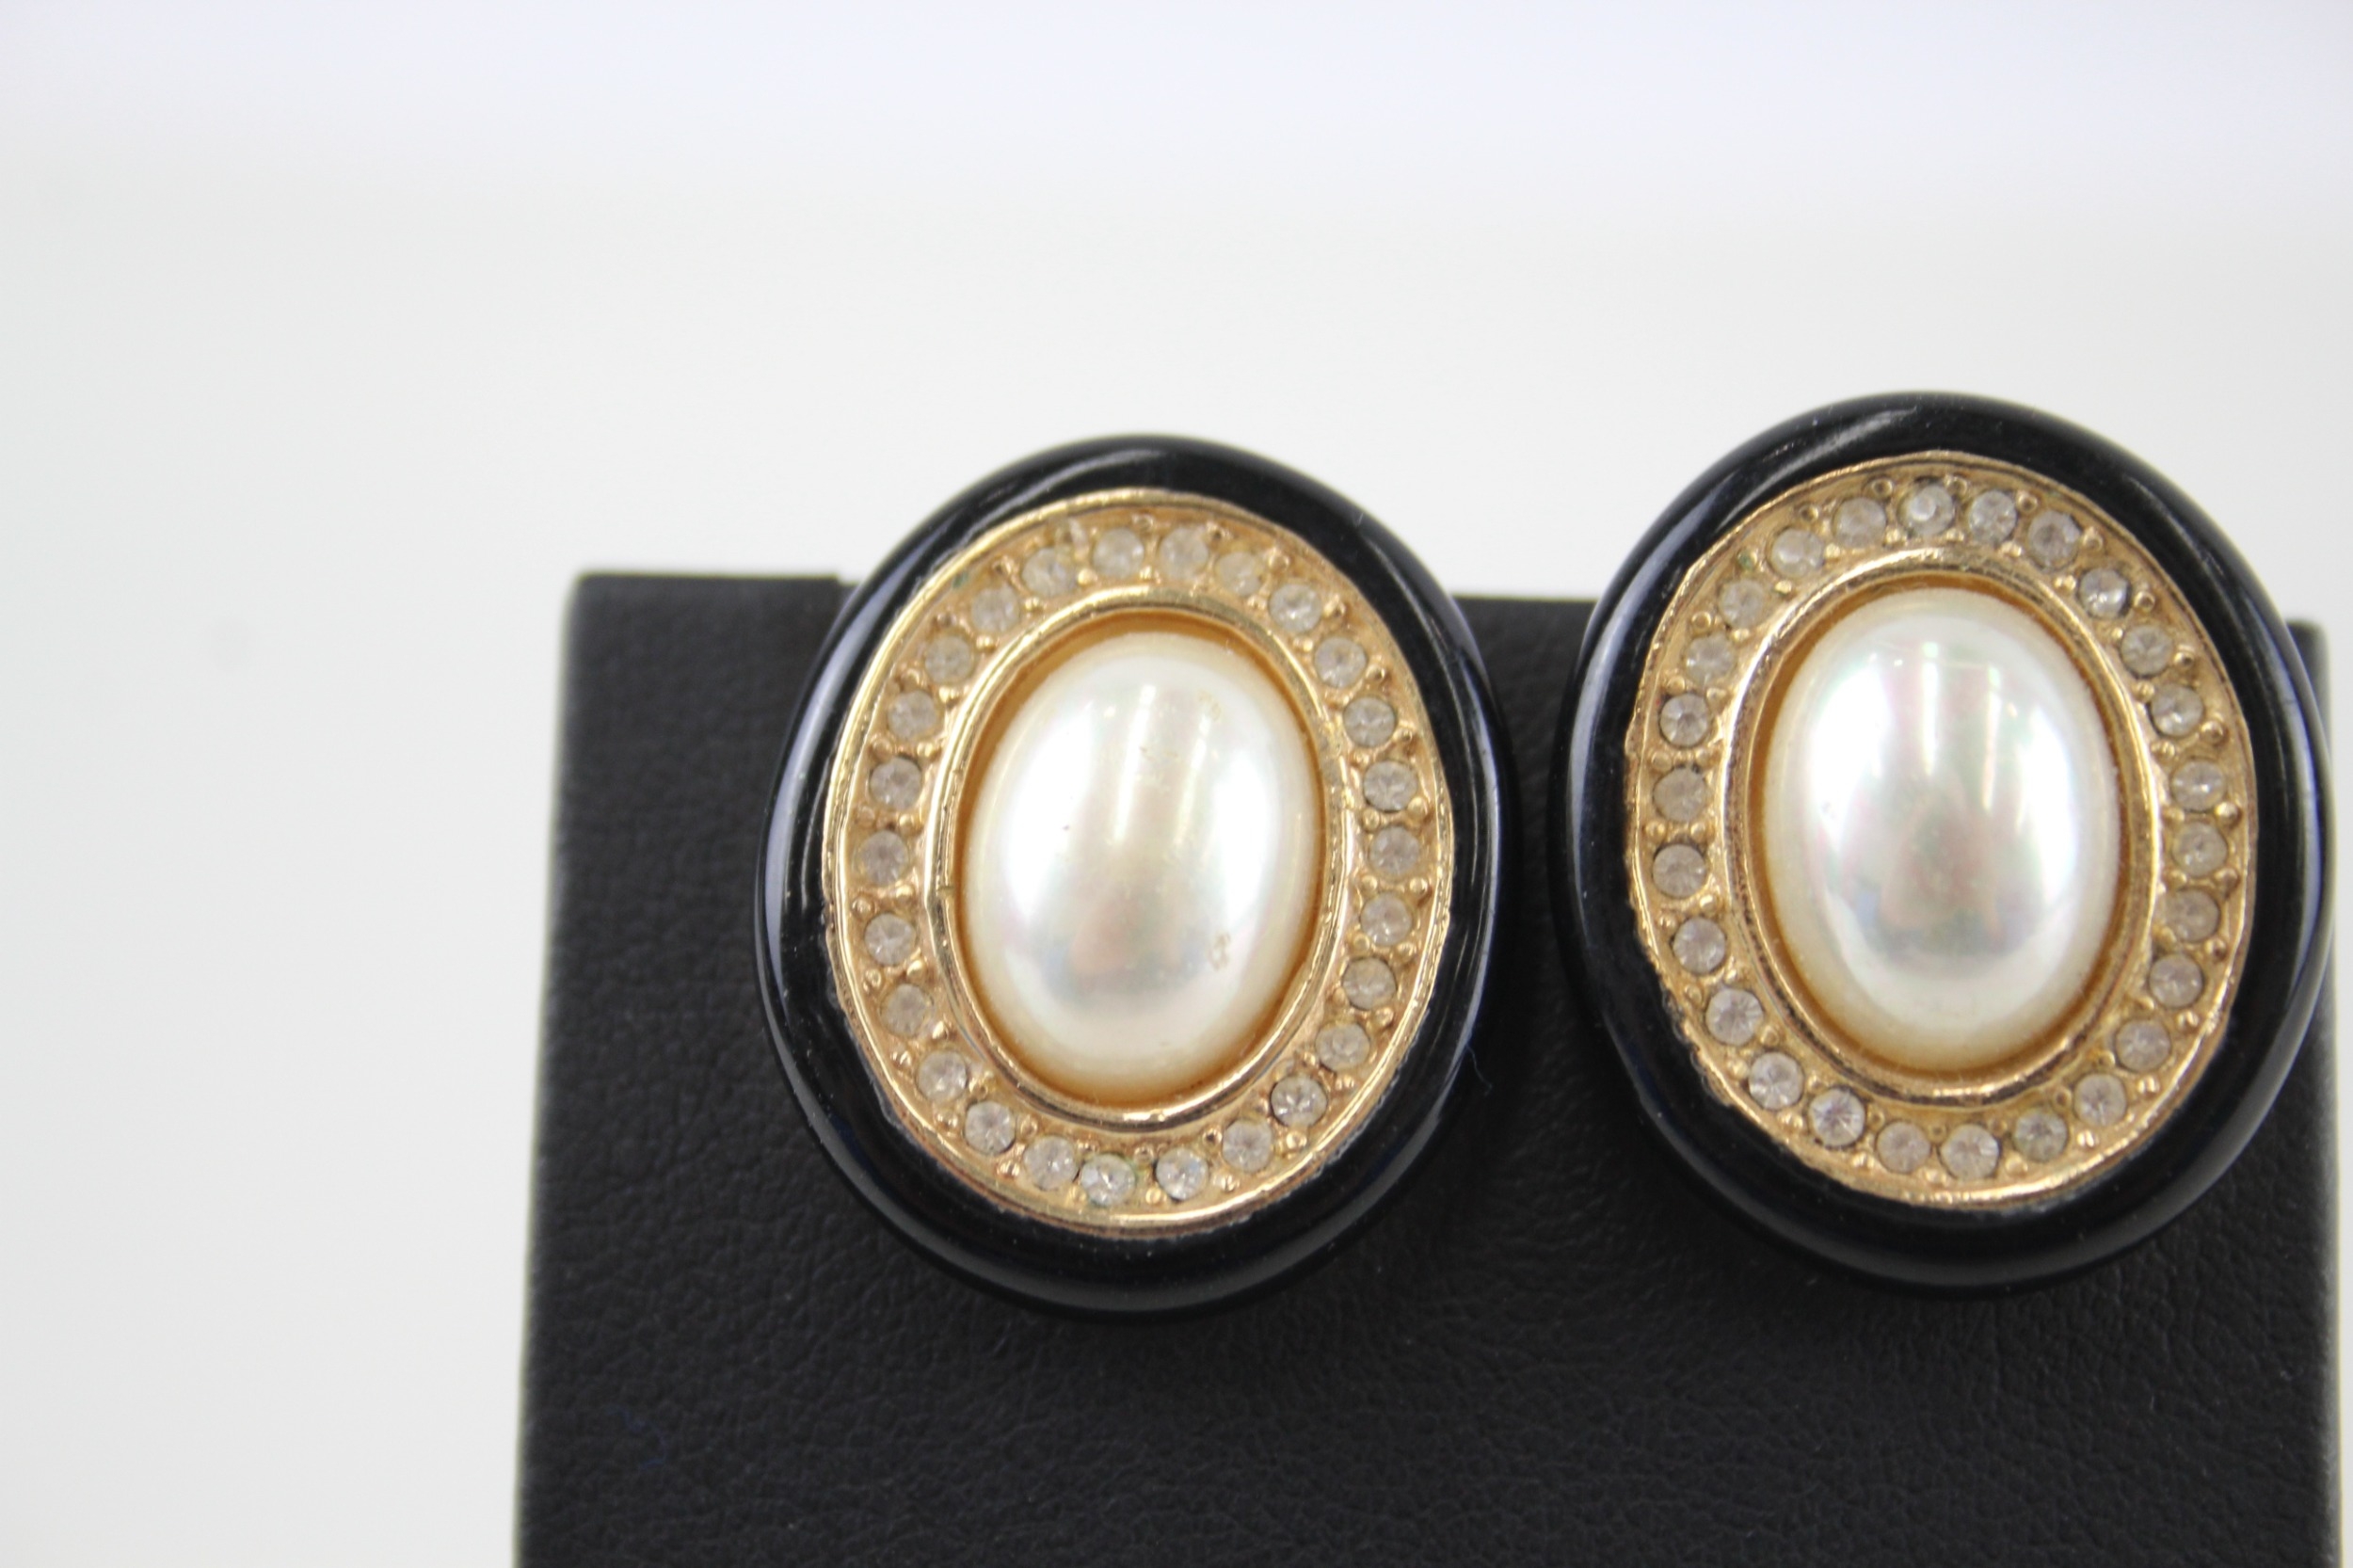 Pair of gold tone simulated pearl clip on earrings by designer Christian Dior (21g) - Image 2 of 5